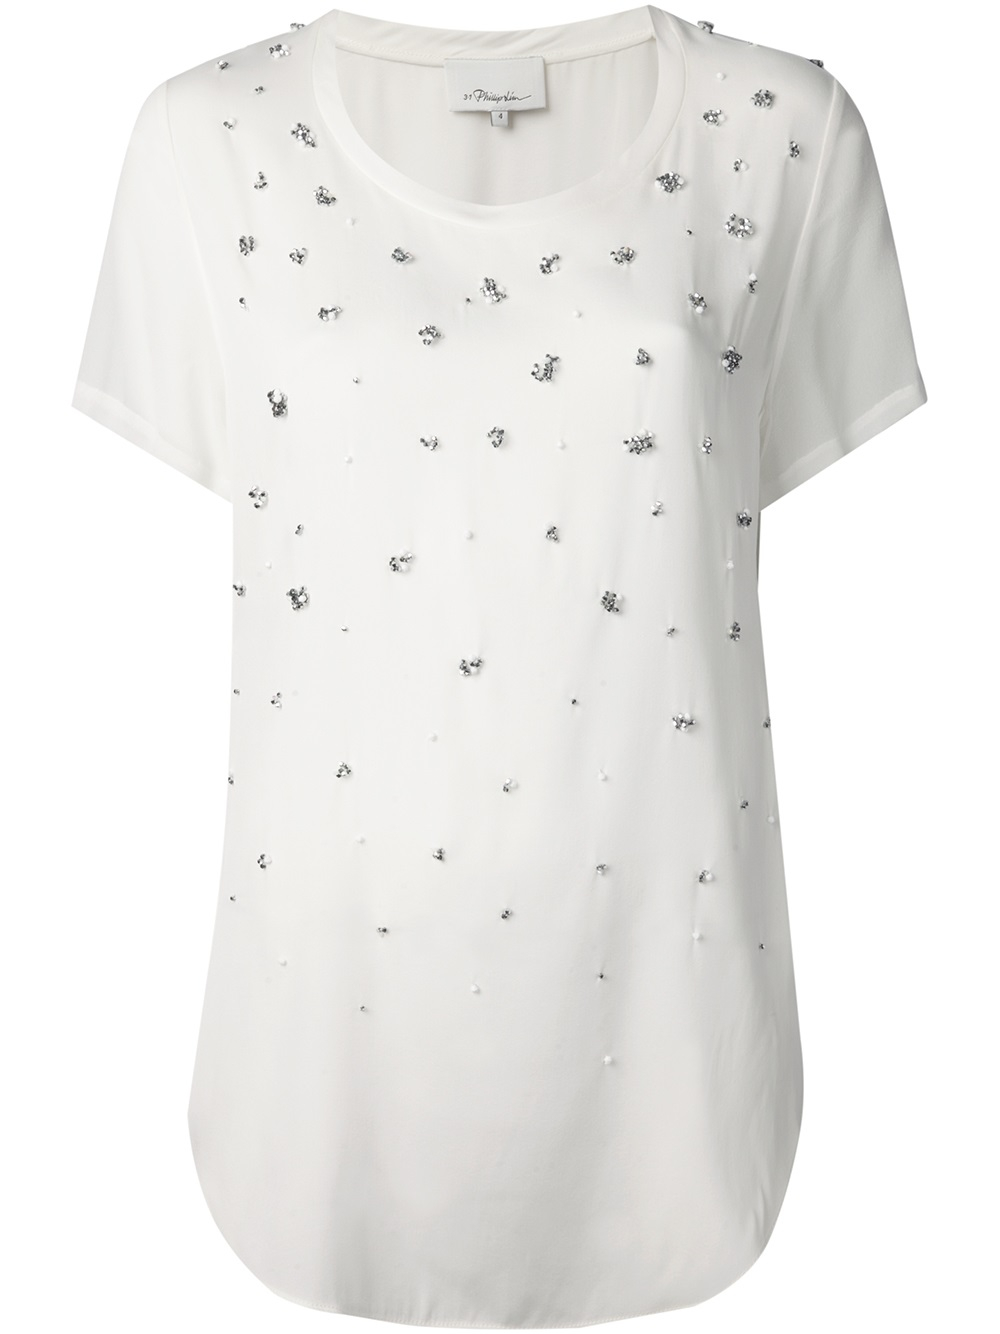 3.1 phillip lim Embellished T-shirt in White | Lyst